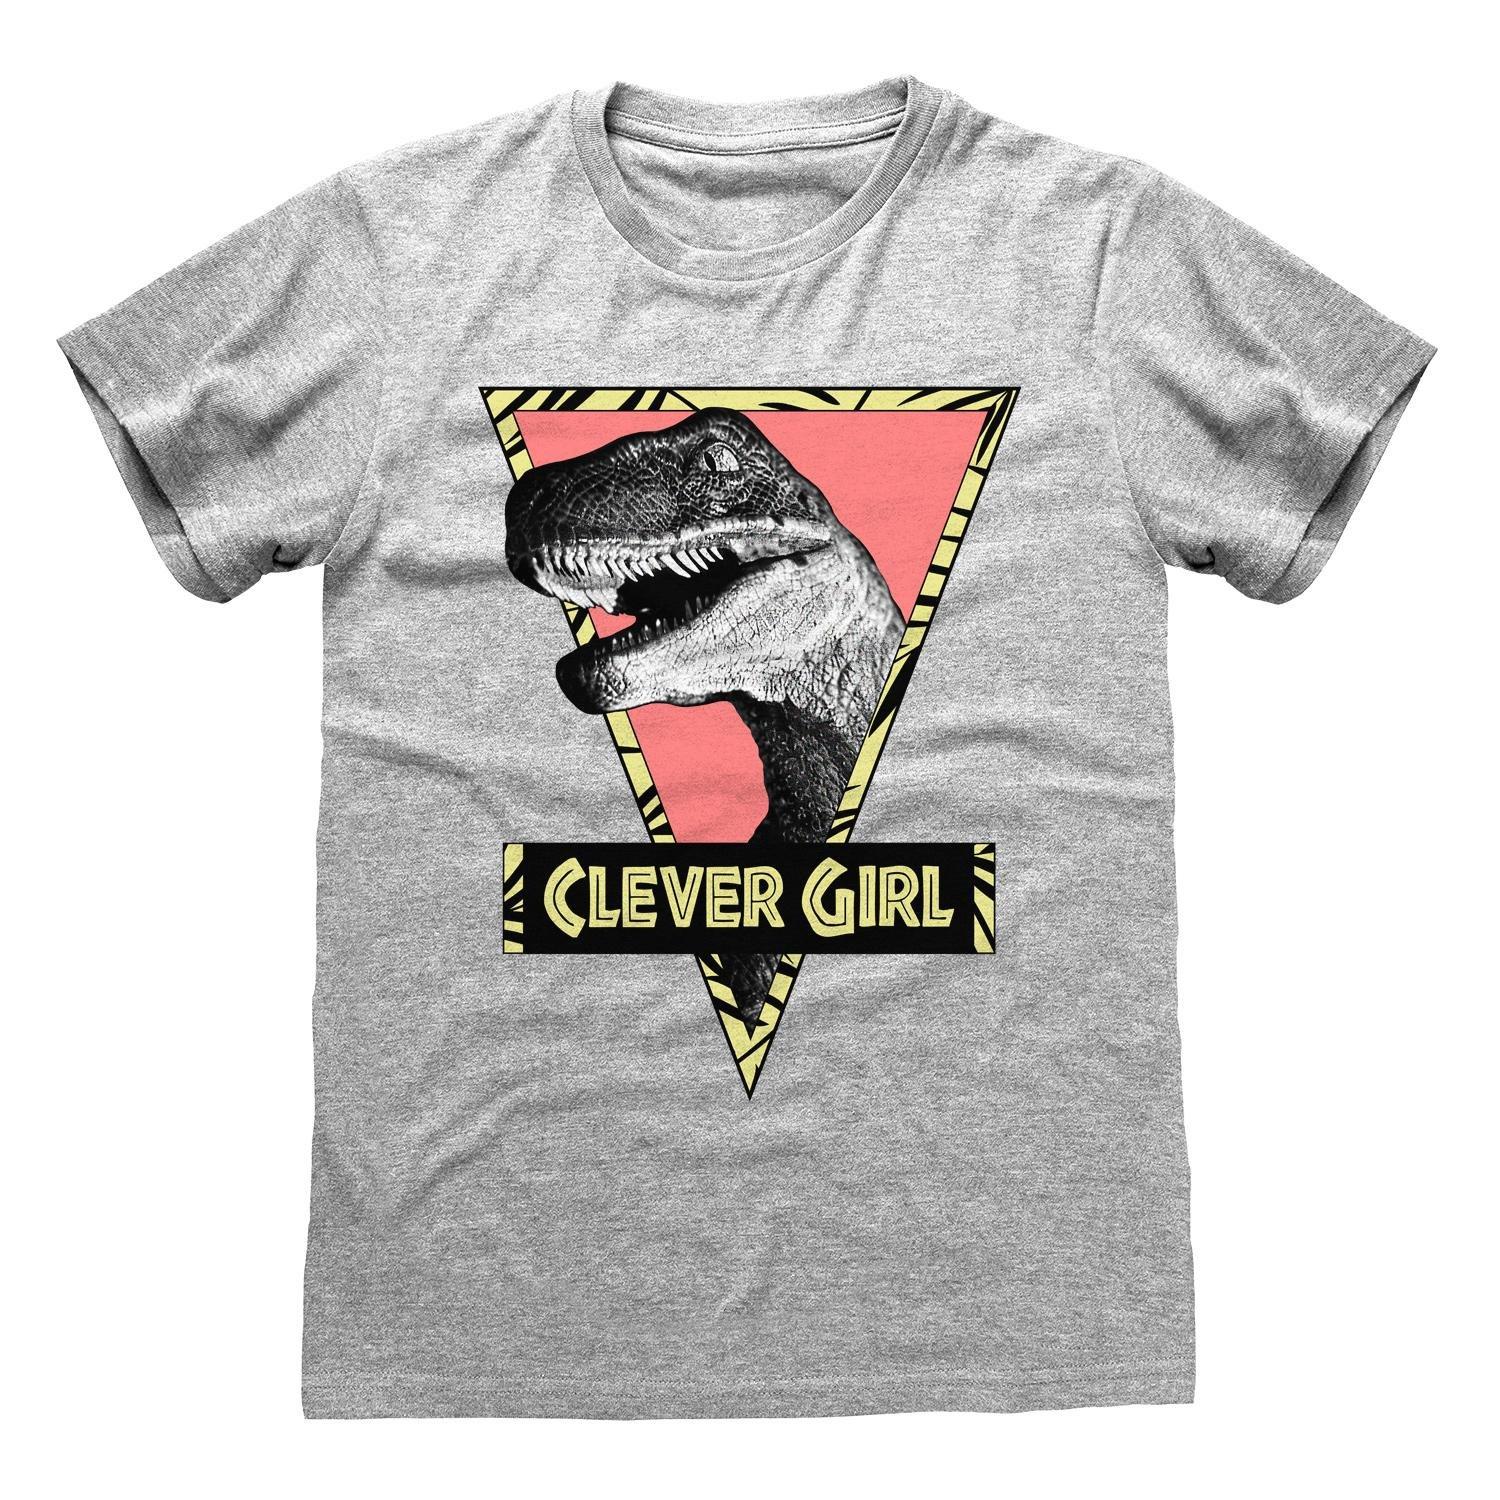 Image of Jurassic Park "Clever Girl" TShirt - M